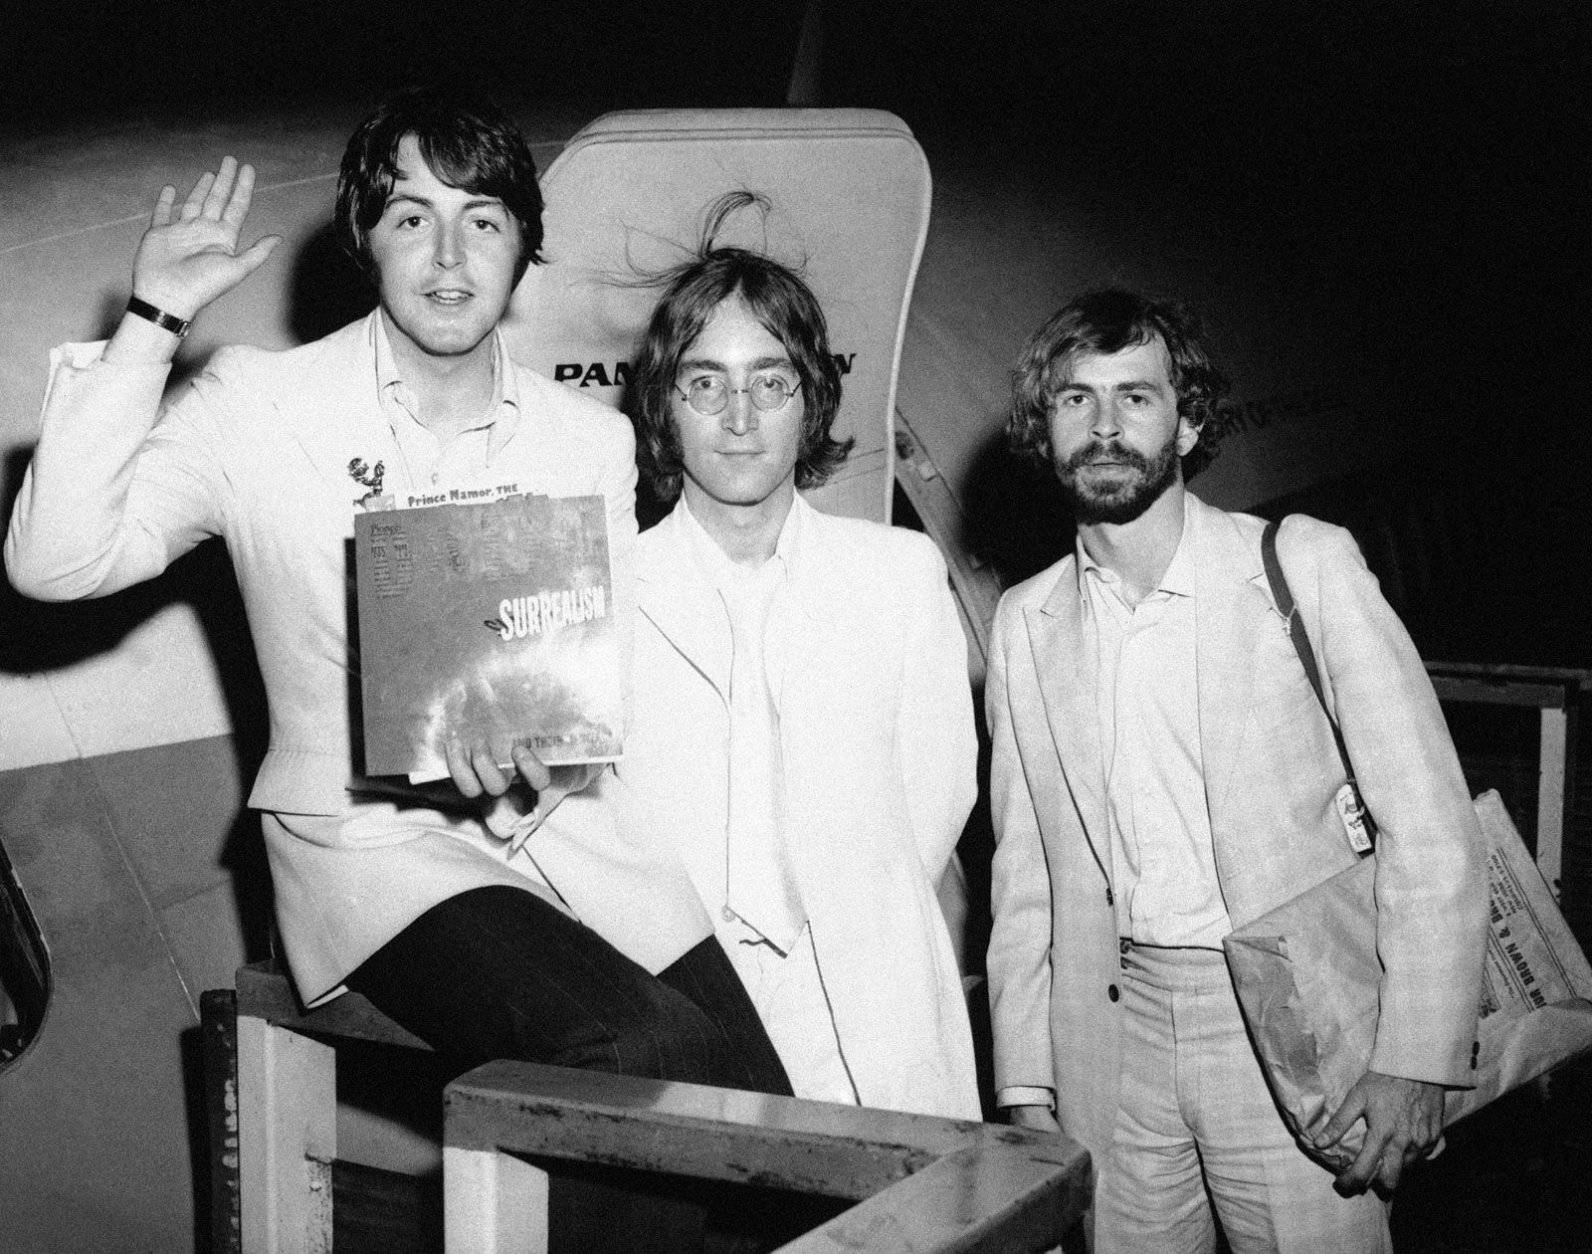 John Lennon, center, and Paul McCartney, left, member of the famed Beatles, announce in New York on May 14, 1968 that Beatles Ltd. is being reorganized for bigger things as Apple Corps. Ltd. (AP Photo)